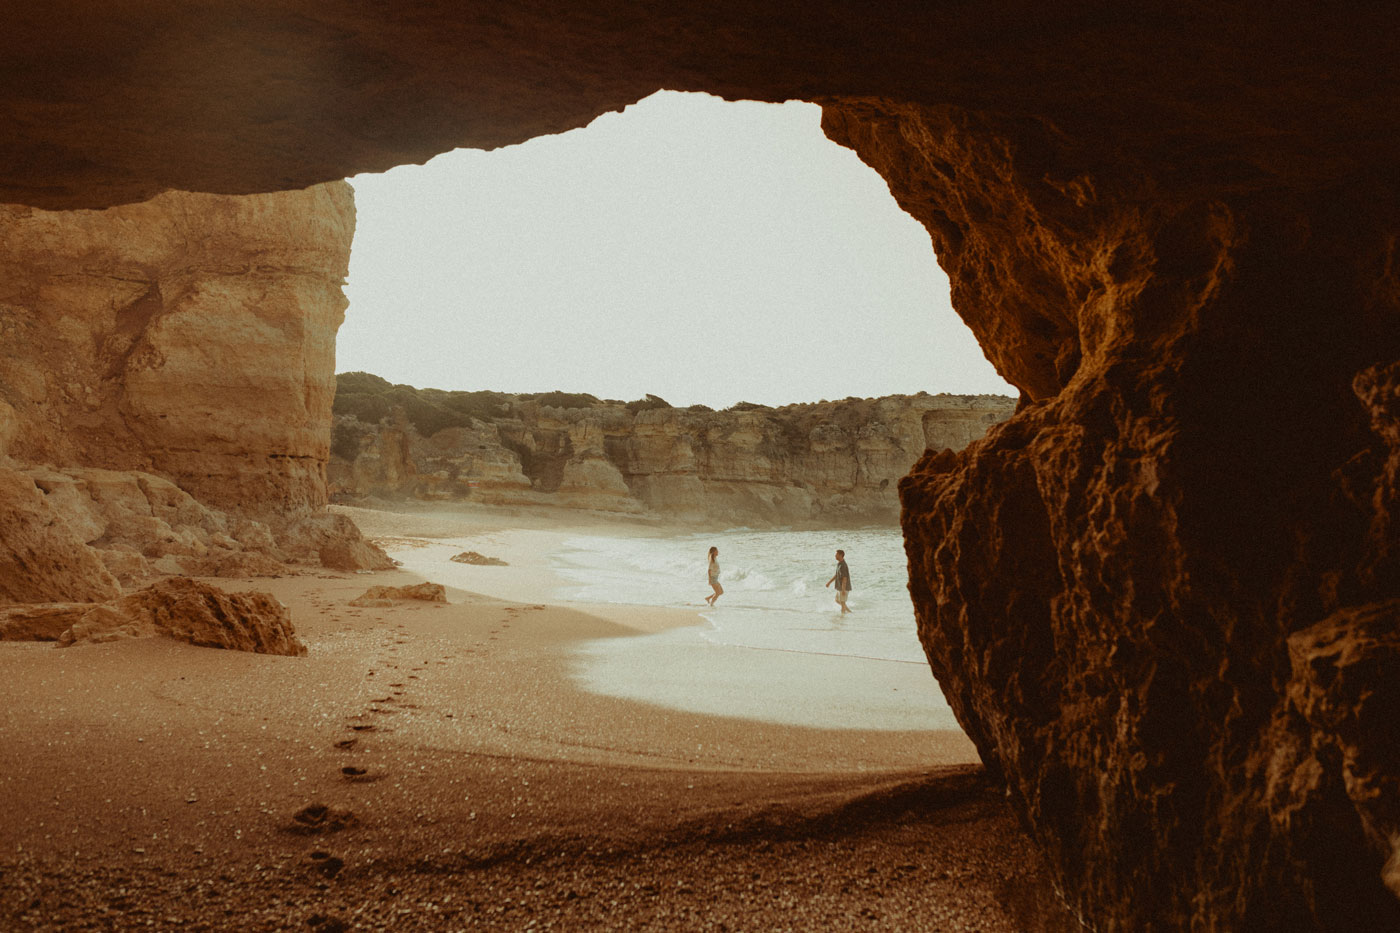 Engagement photos in the Algarve